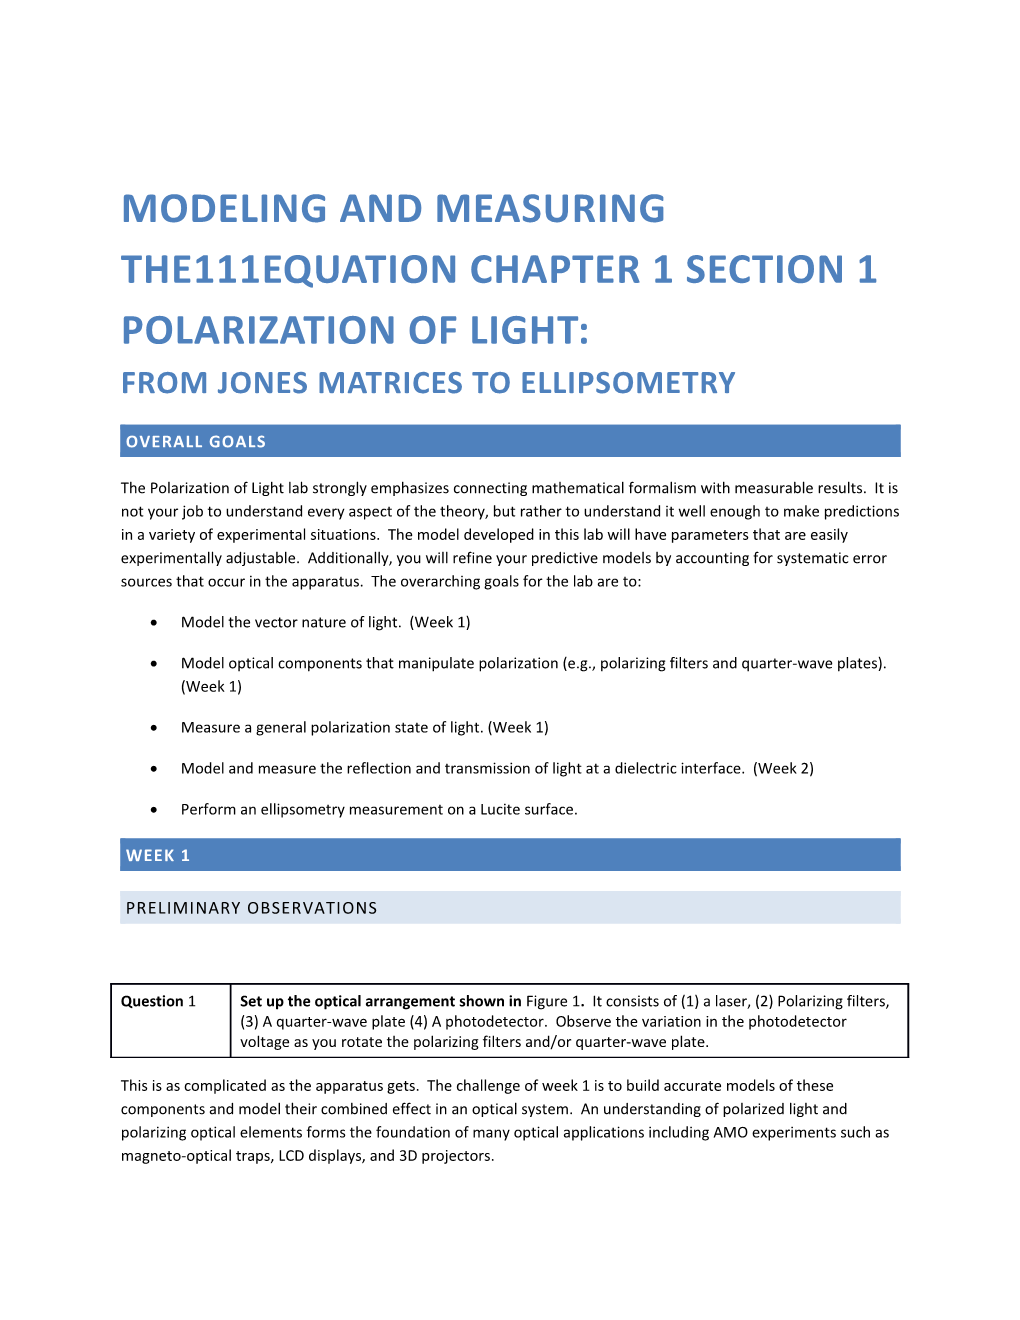 Modeling and Measuring Thepolarization of Light: from Jones Matrices to Ellipsometry